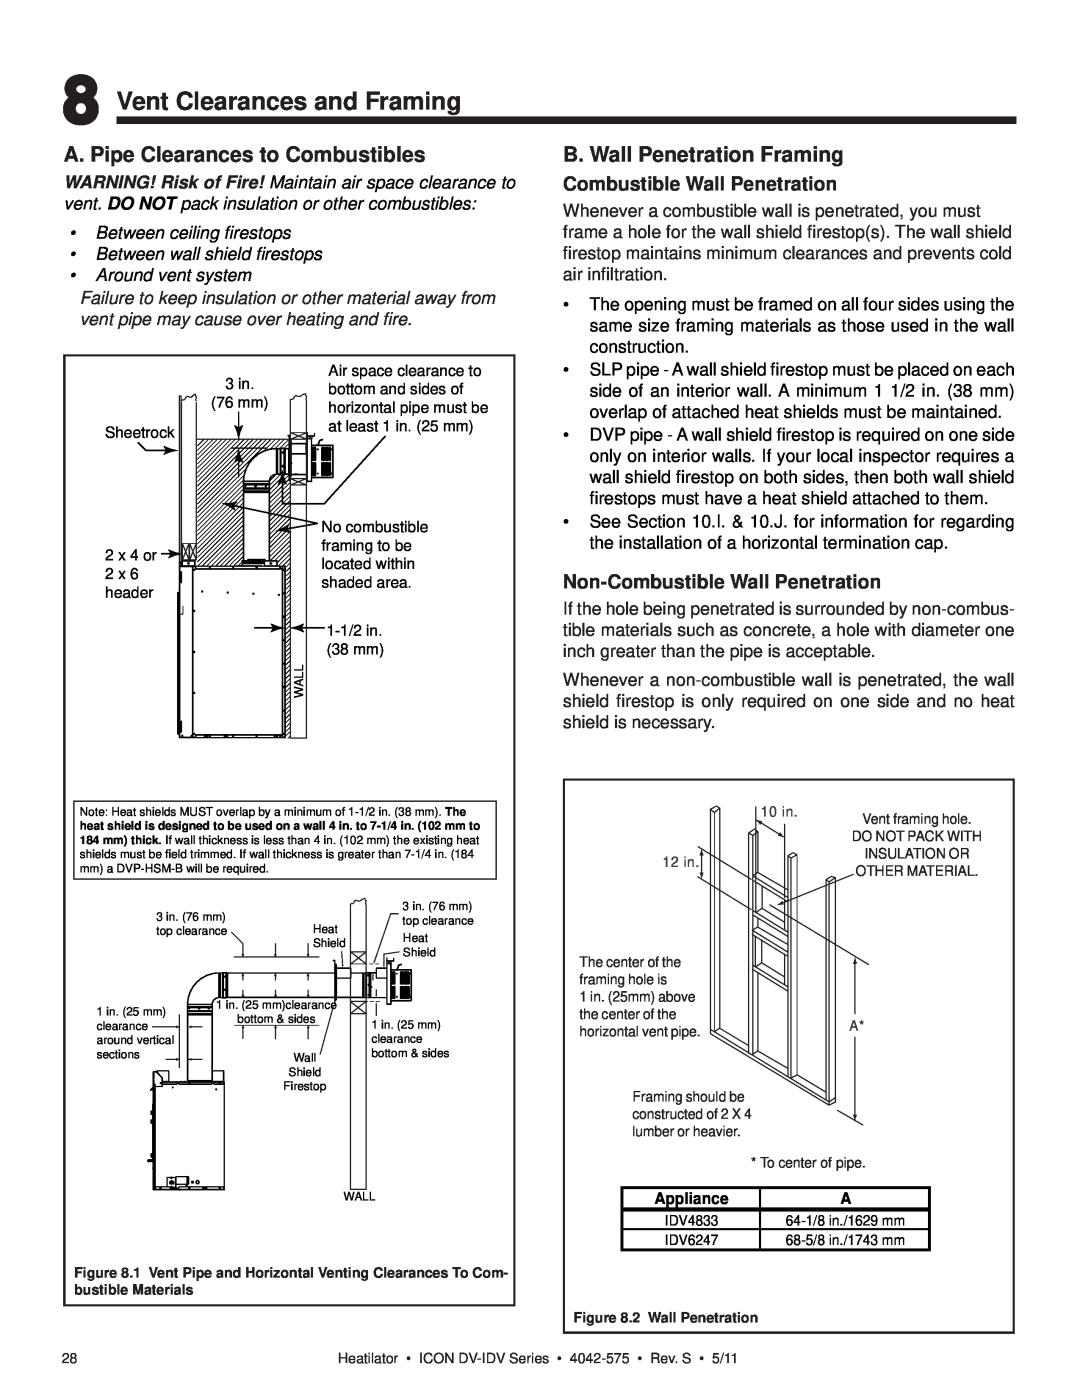 Heatiator IDV4833IT Vent Clearances and Framing, A. Pipe Clearances to Combustibles, B. Wall Penetration Framing 